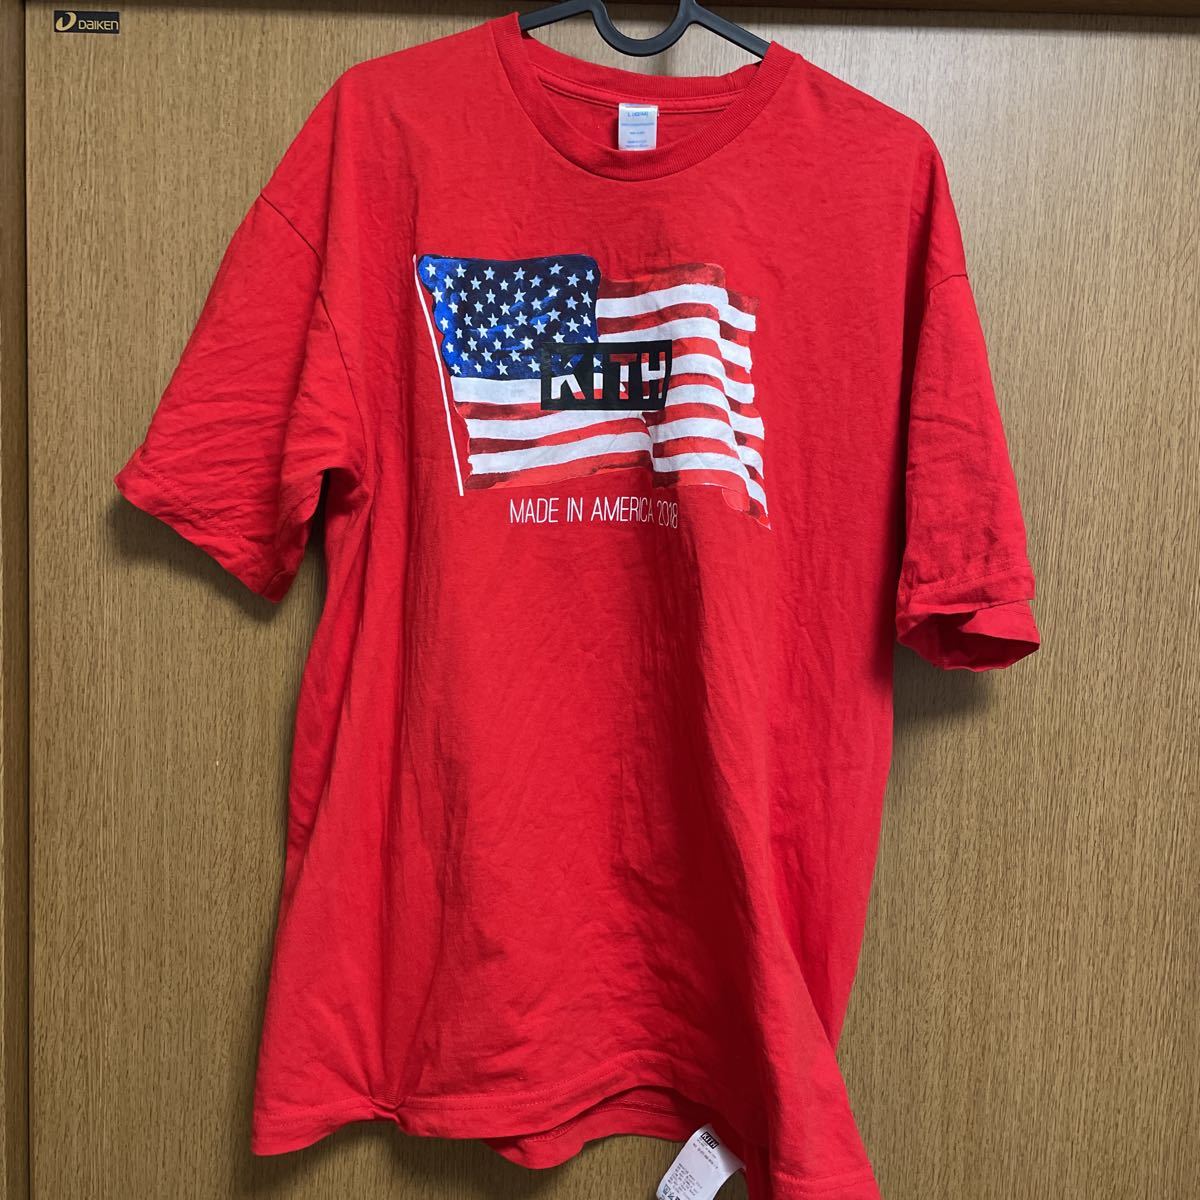 KITH Vintage Tee アメリカ国旗　1点物　ヴィンテージ　Tシャツ_画像1